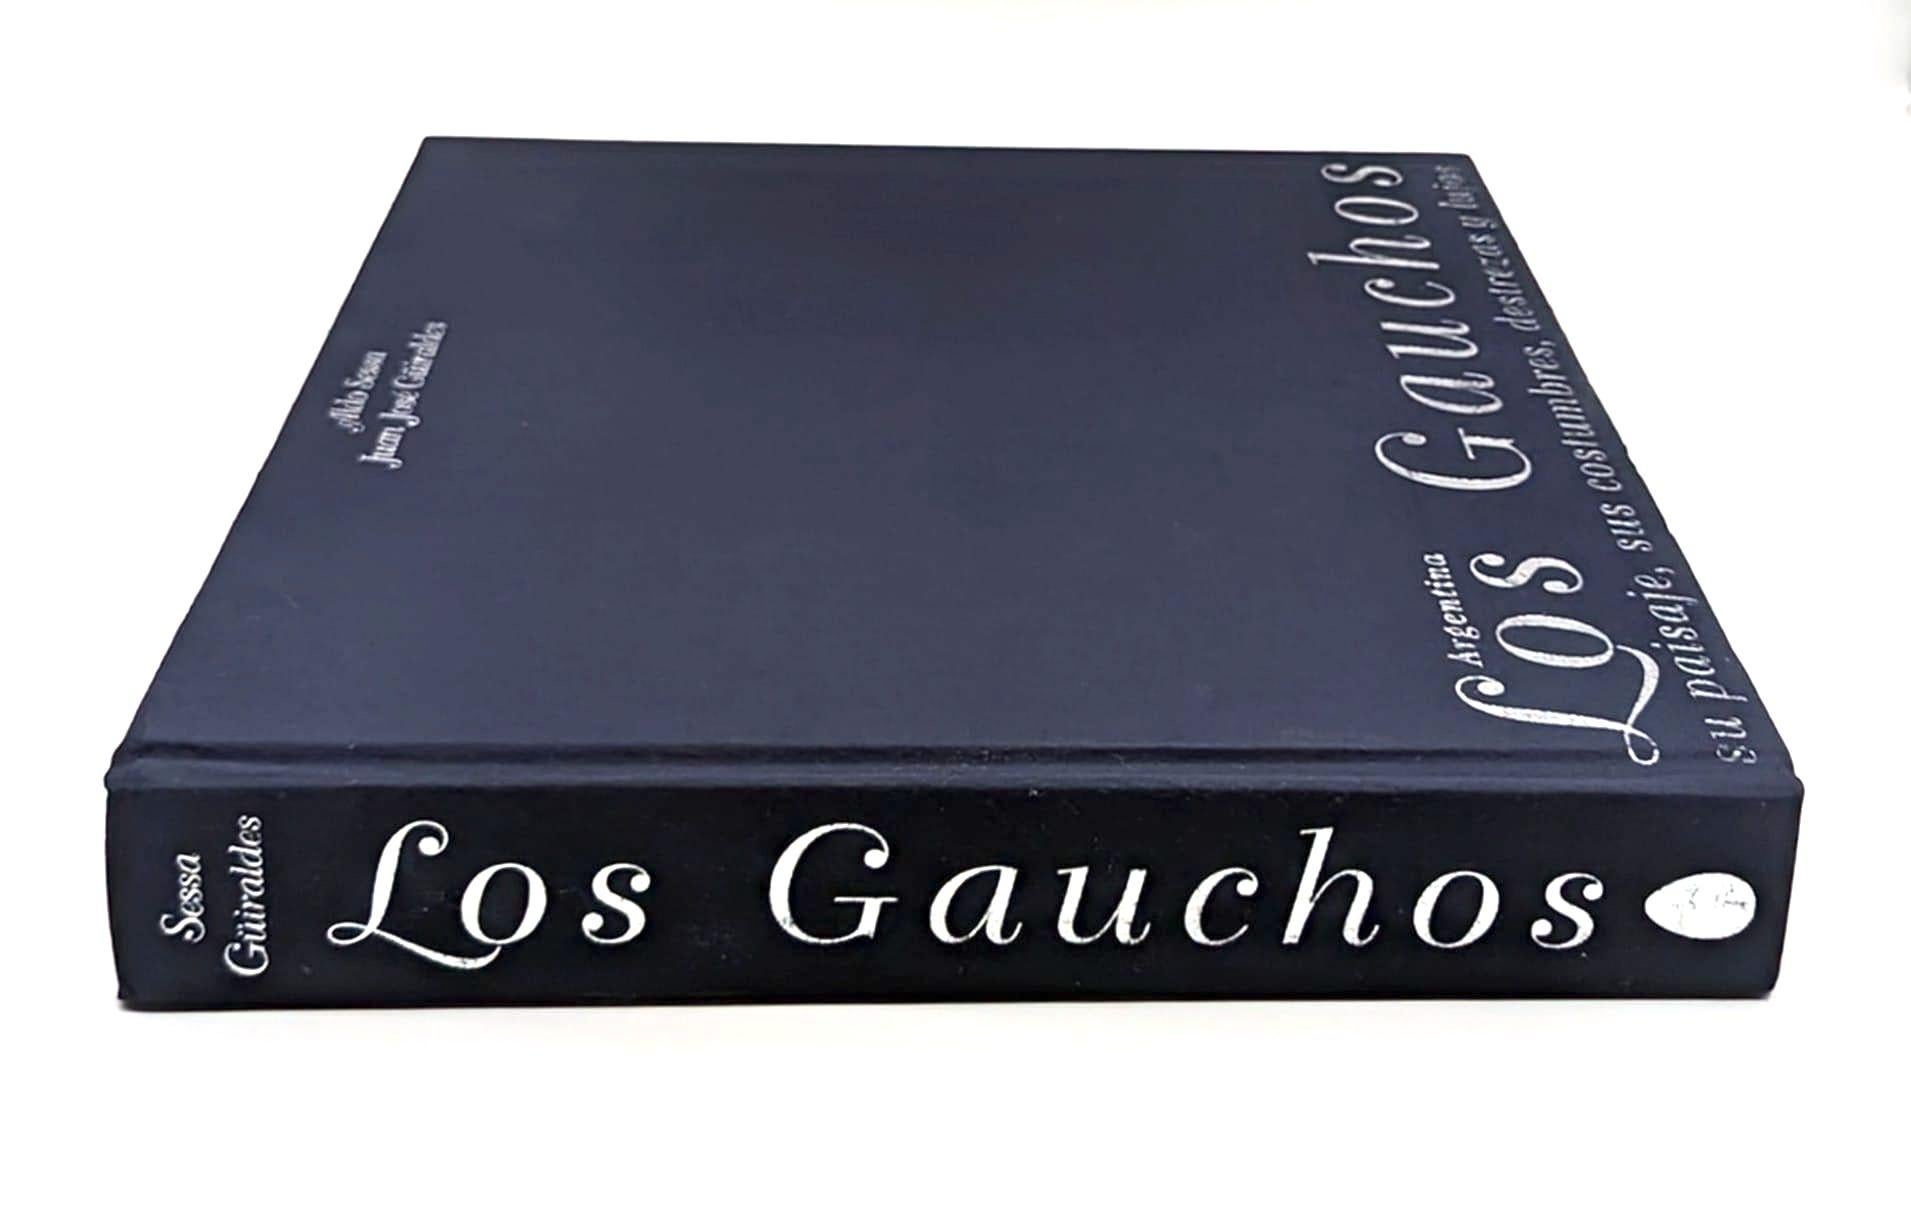 Cotton The Gauchos: Their Landscape, Customs, Skills, and Luxuries, by Aldo Sessa For Sale